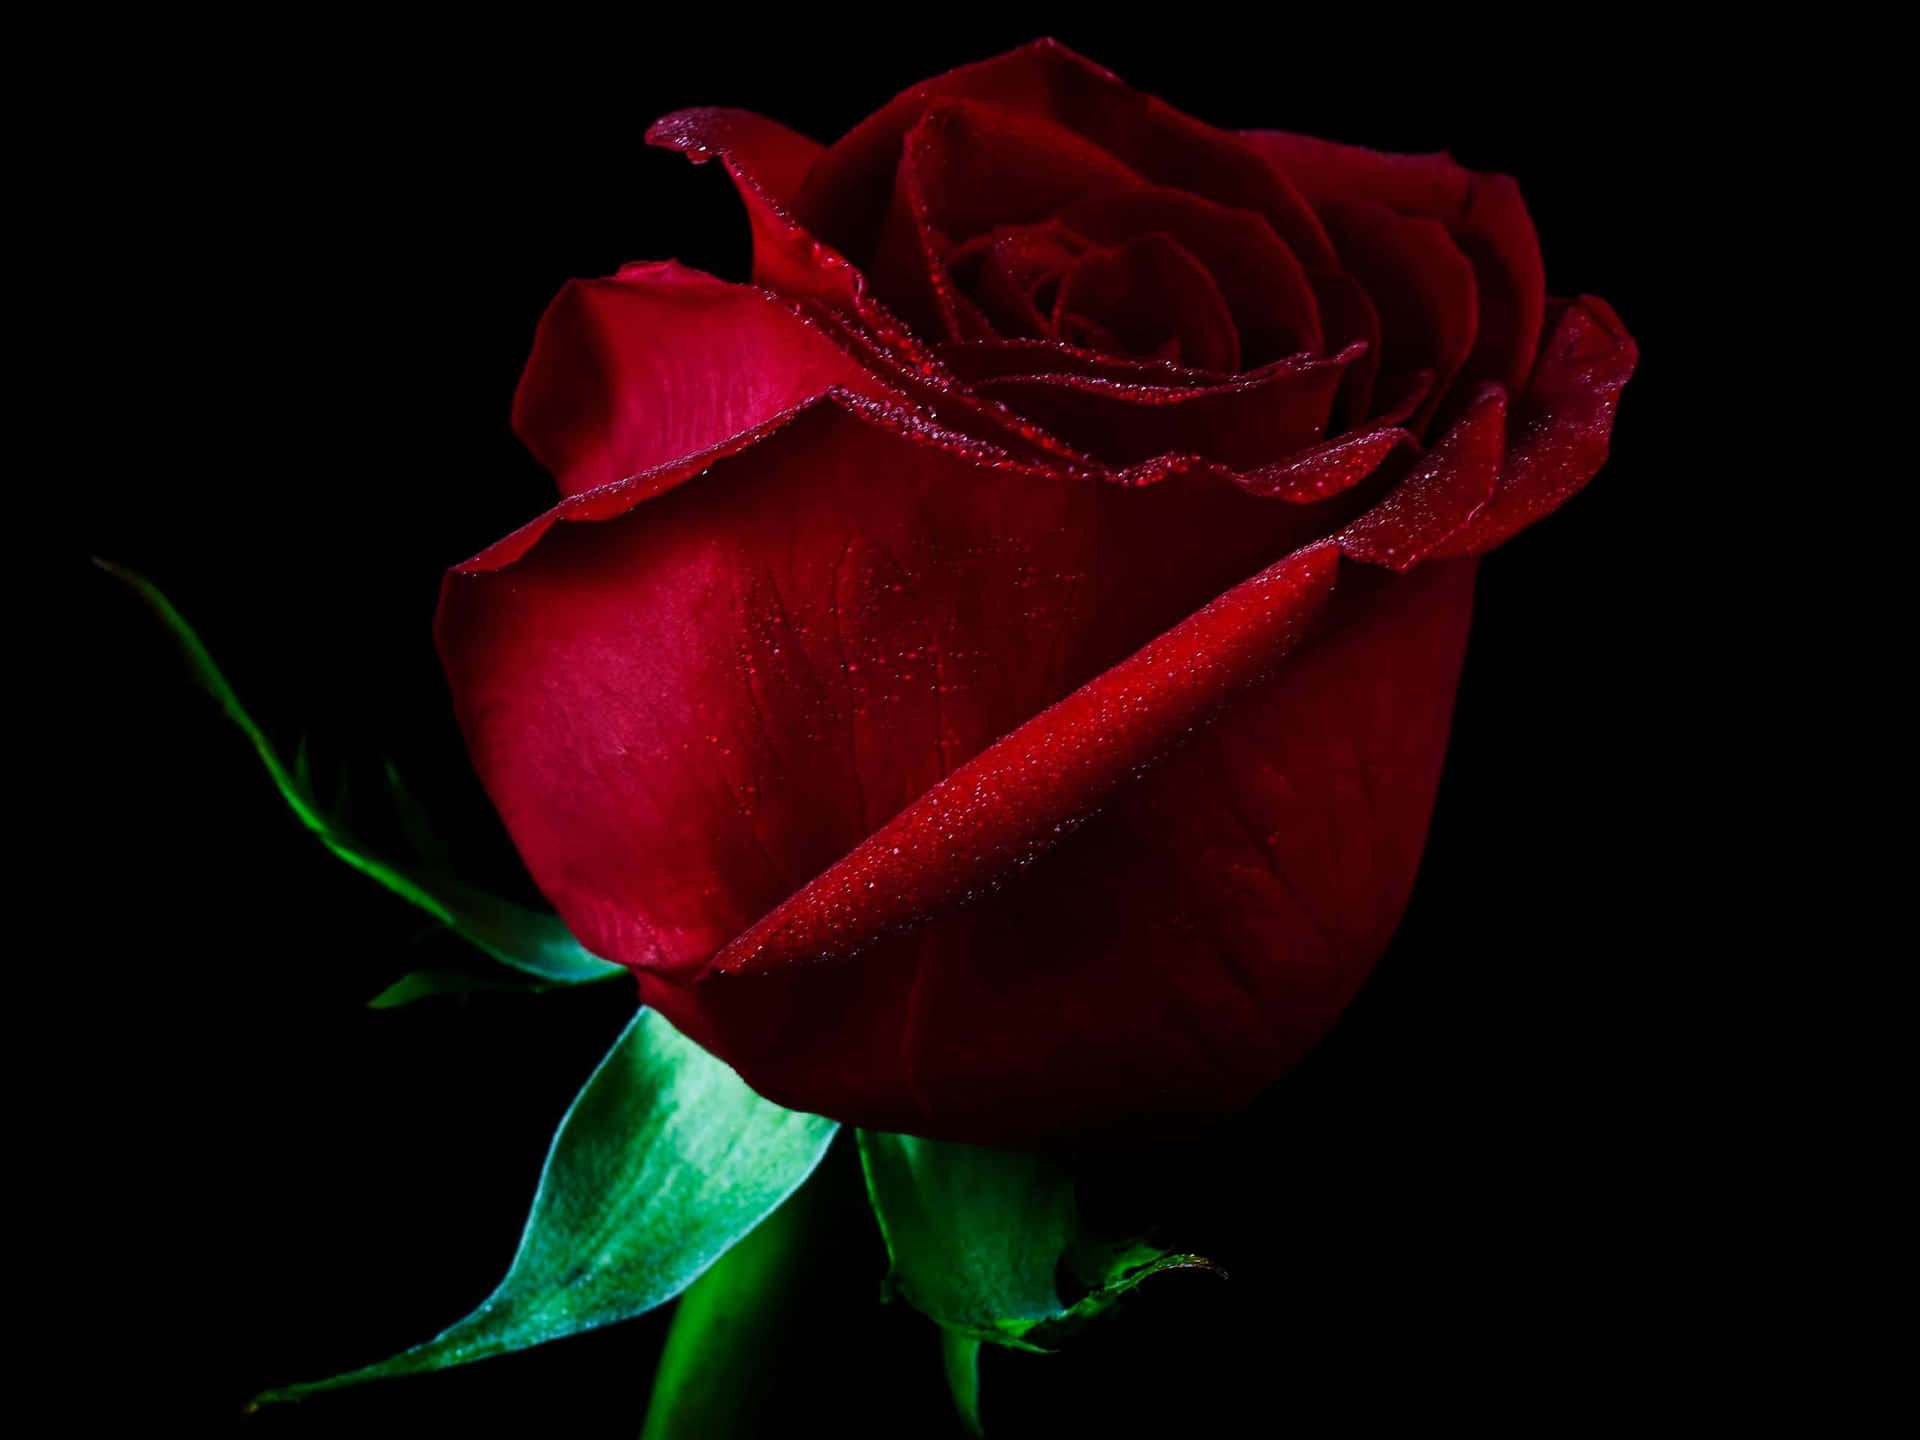 A delicate red rose against a crisp white background